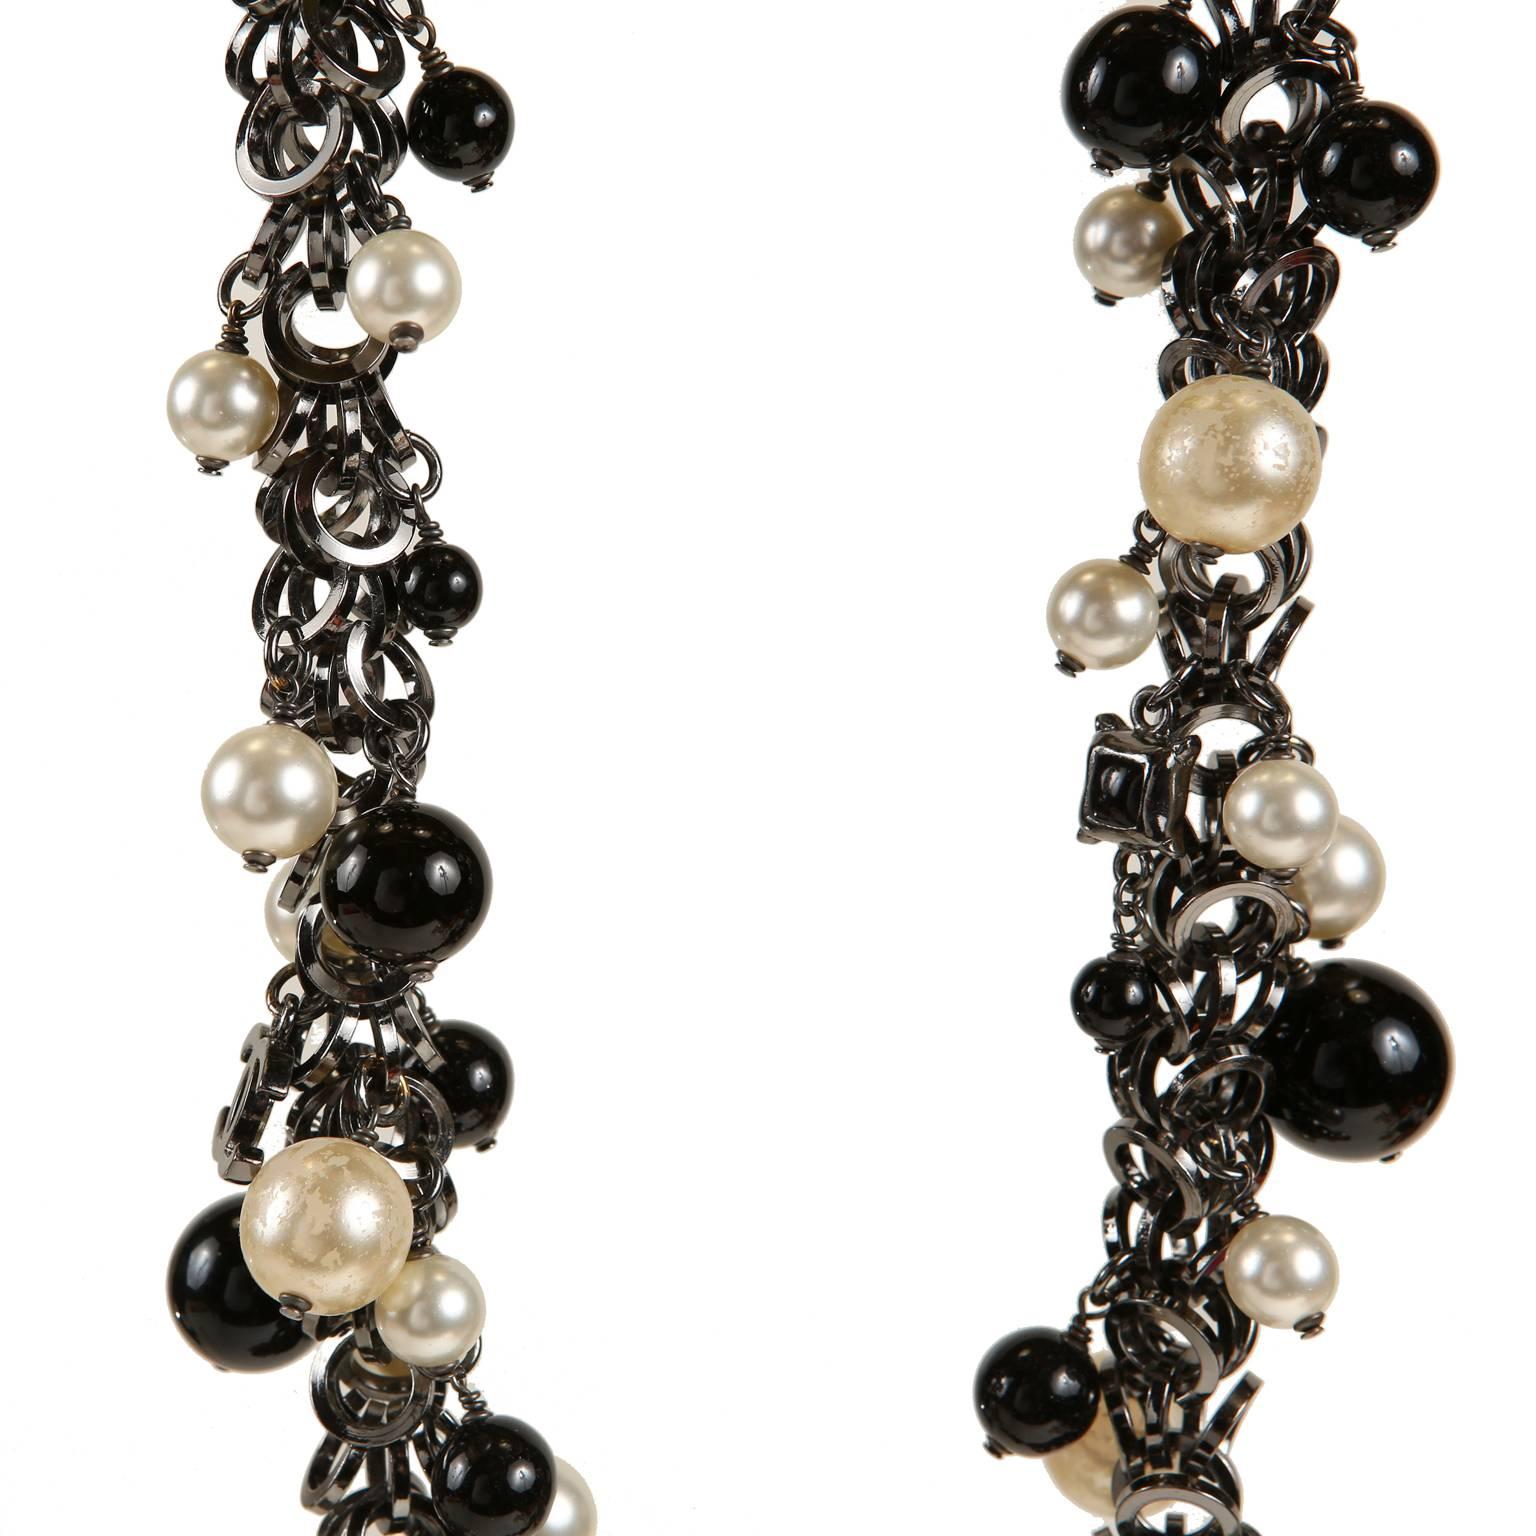 Chanel Black and White Pearl Necklace For Sale 2